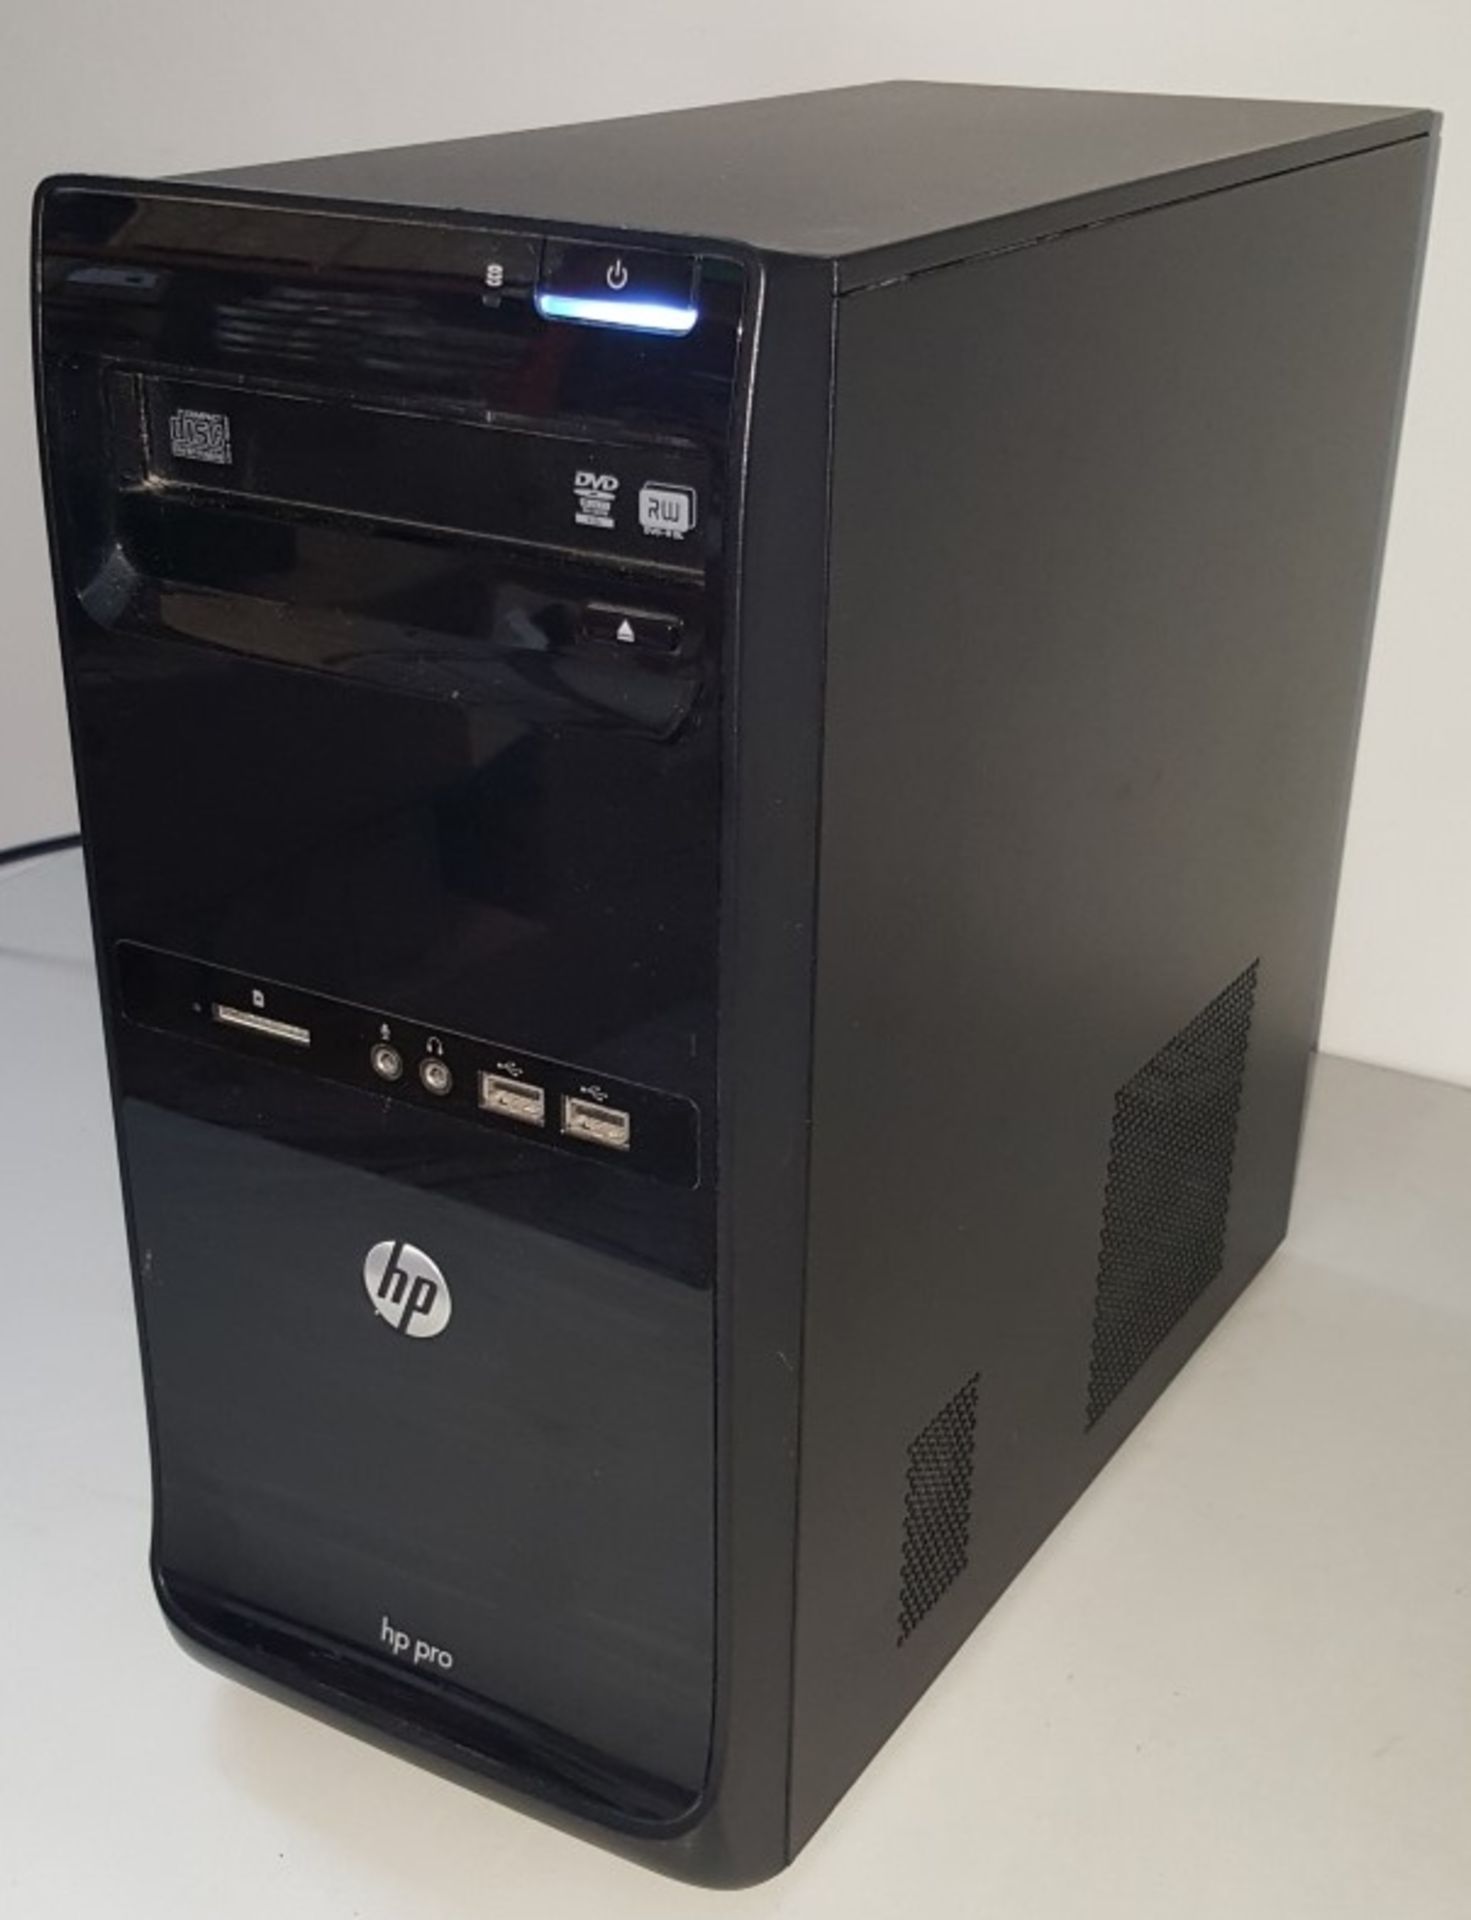 1 x HP Pro 3515 MT AMD A6-5400K 3.60GHz 4GB RAM Desktop PC - Ref BLT105 - Image 3 of 5